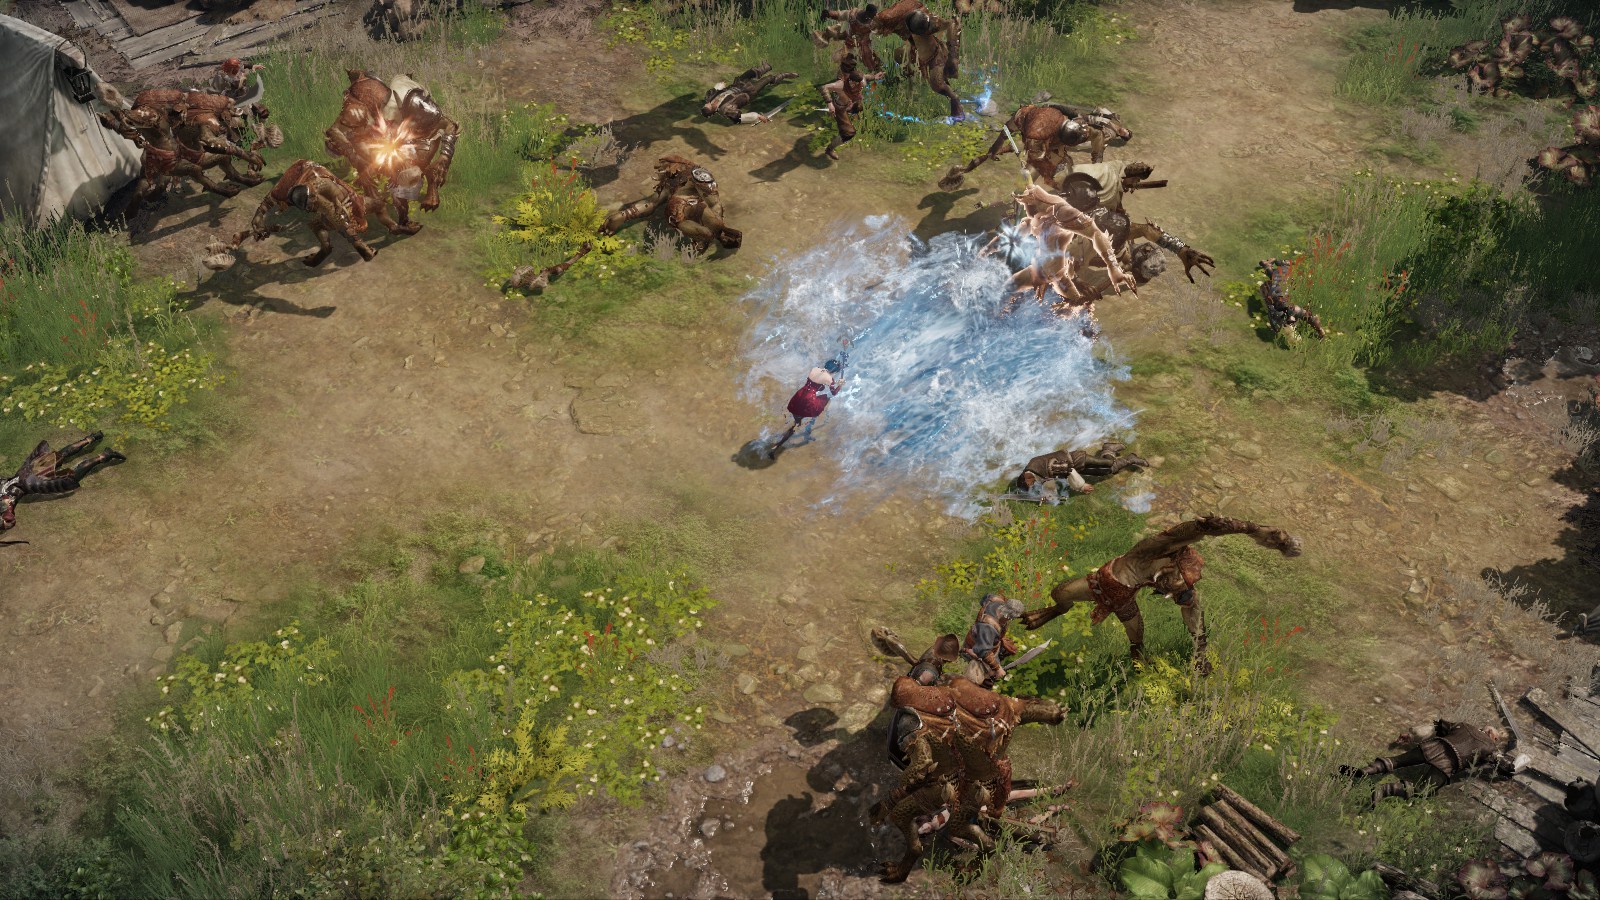 Slayer Lost Ark Academy - News  Lost Ark - Free to Play MMO Action RPG